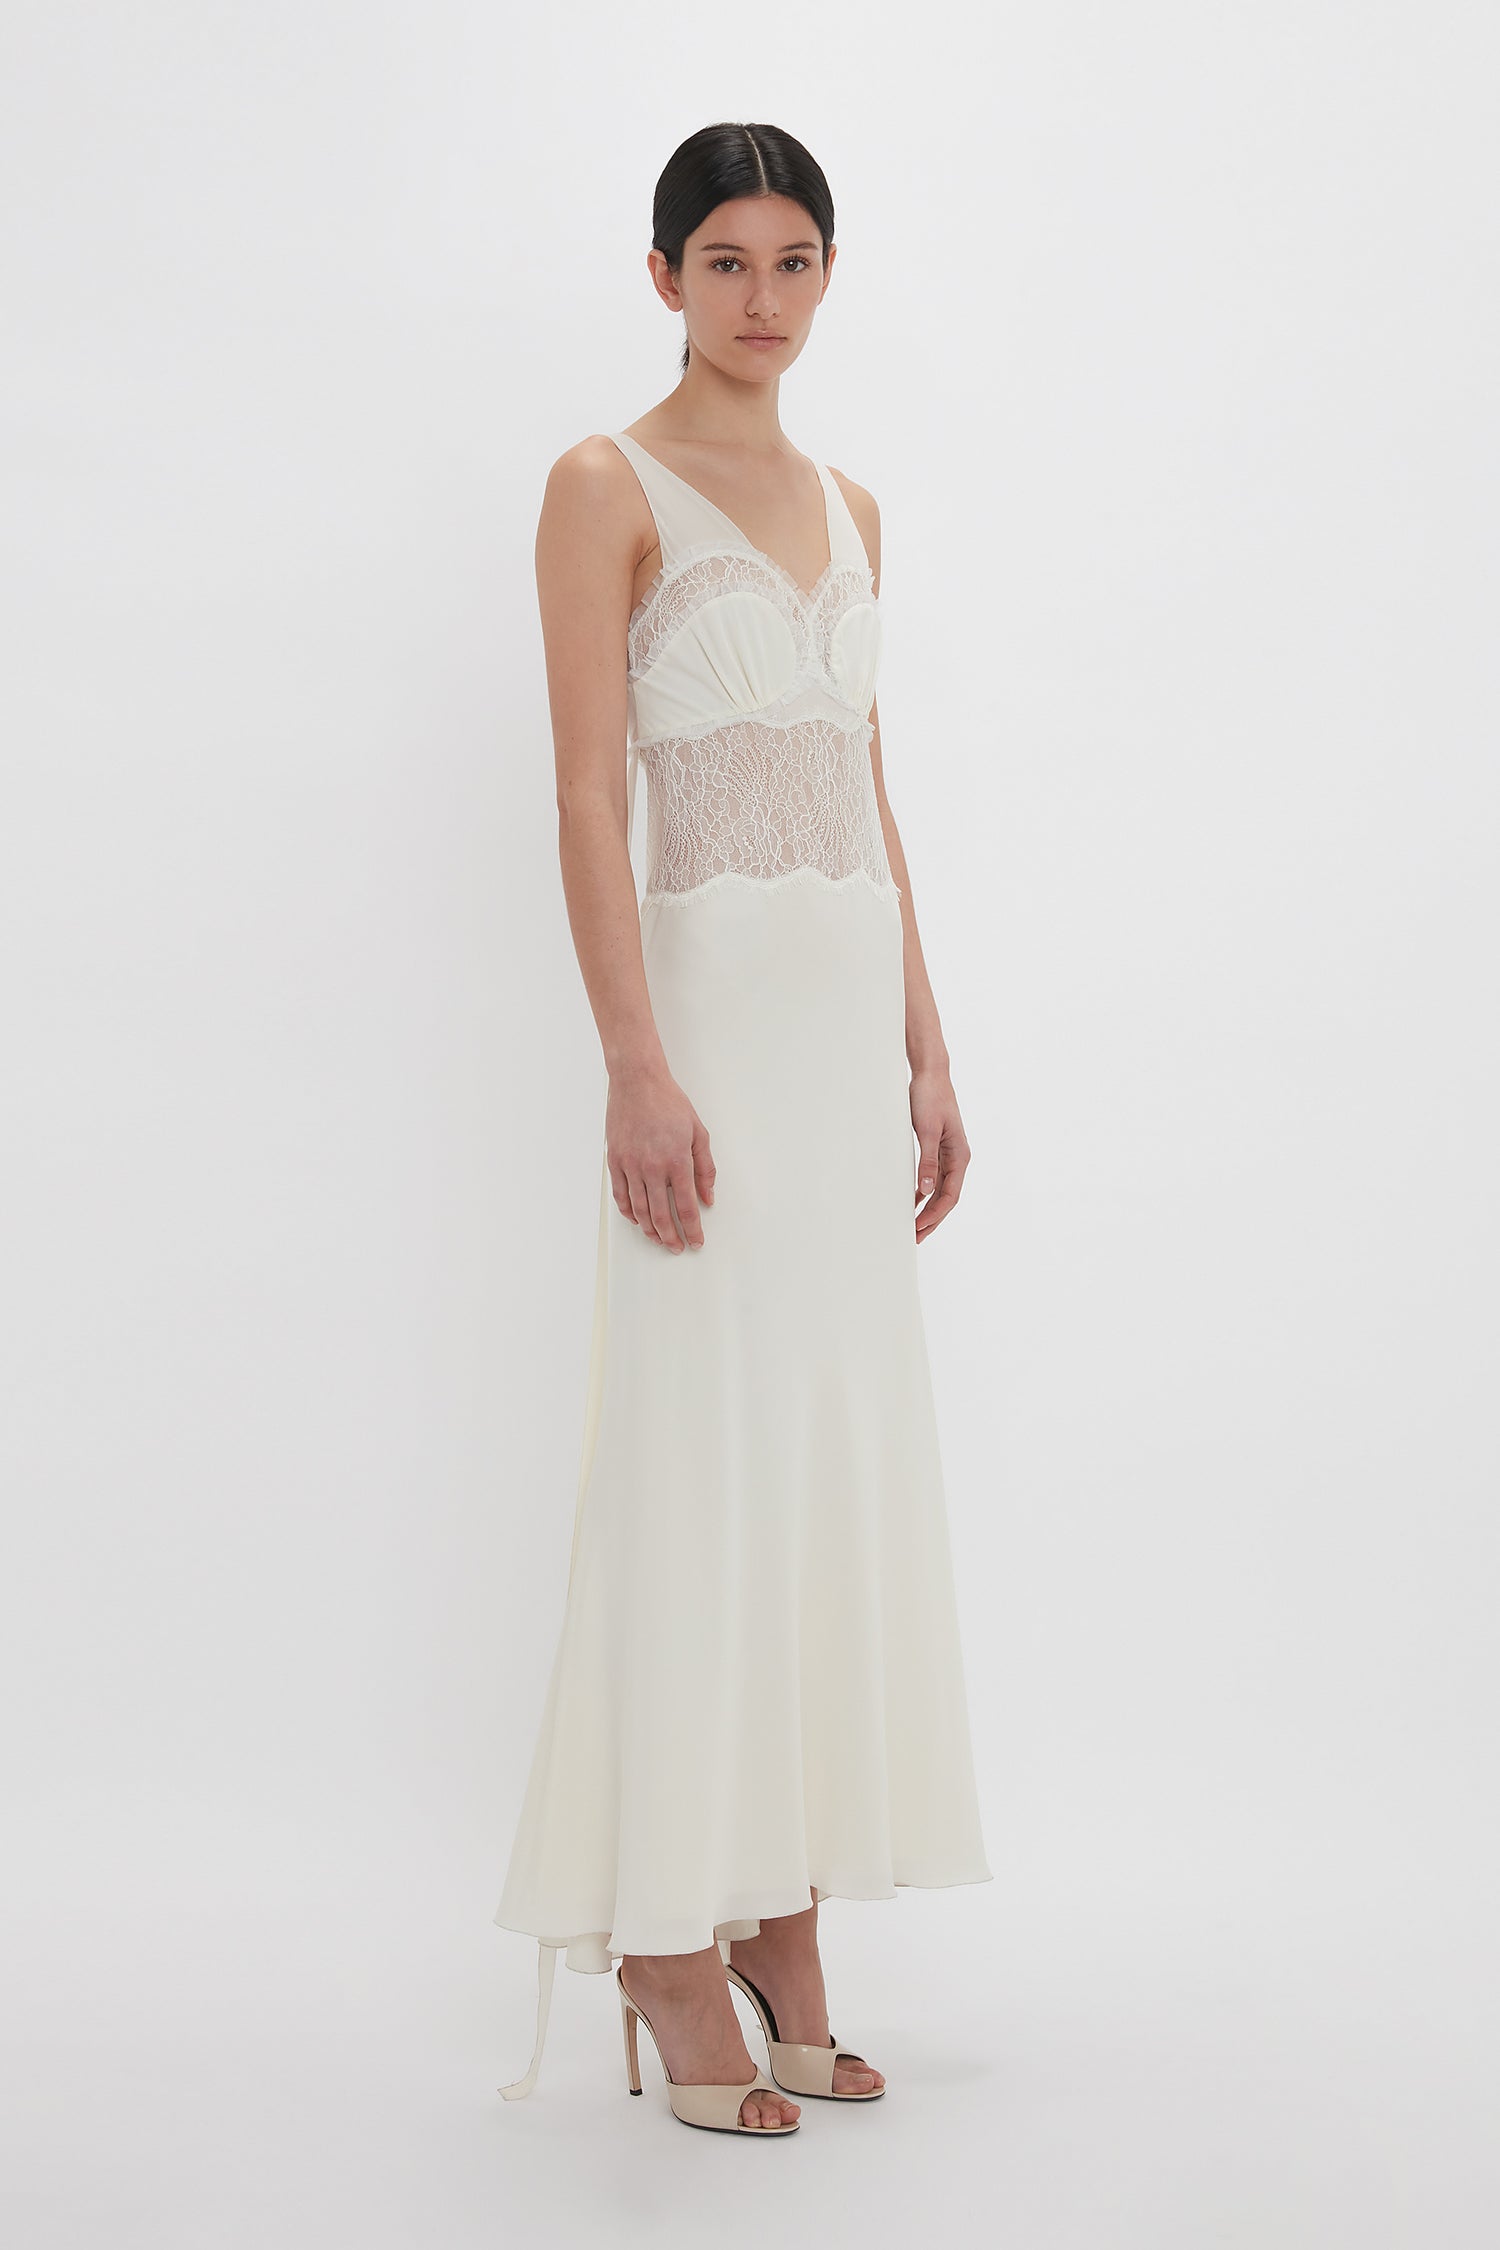 A person wearing the Ruffle Detail Midi Dress In Ivory by Victoria Beckham, with tactile lace detailing on the bodice and thin spaghetti straps, stands against a plain white background.